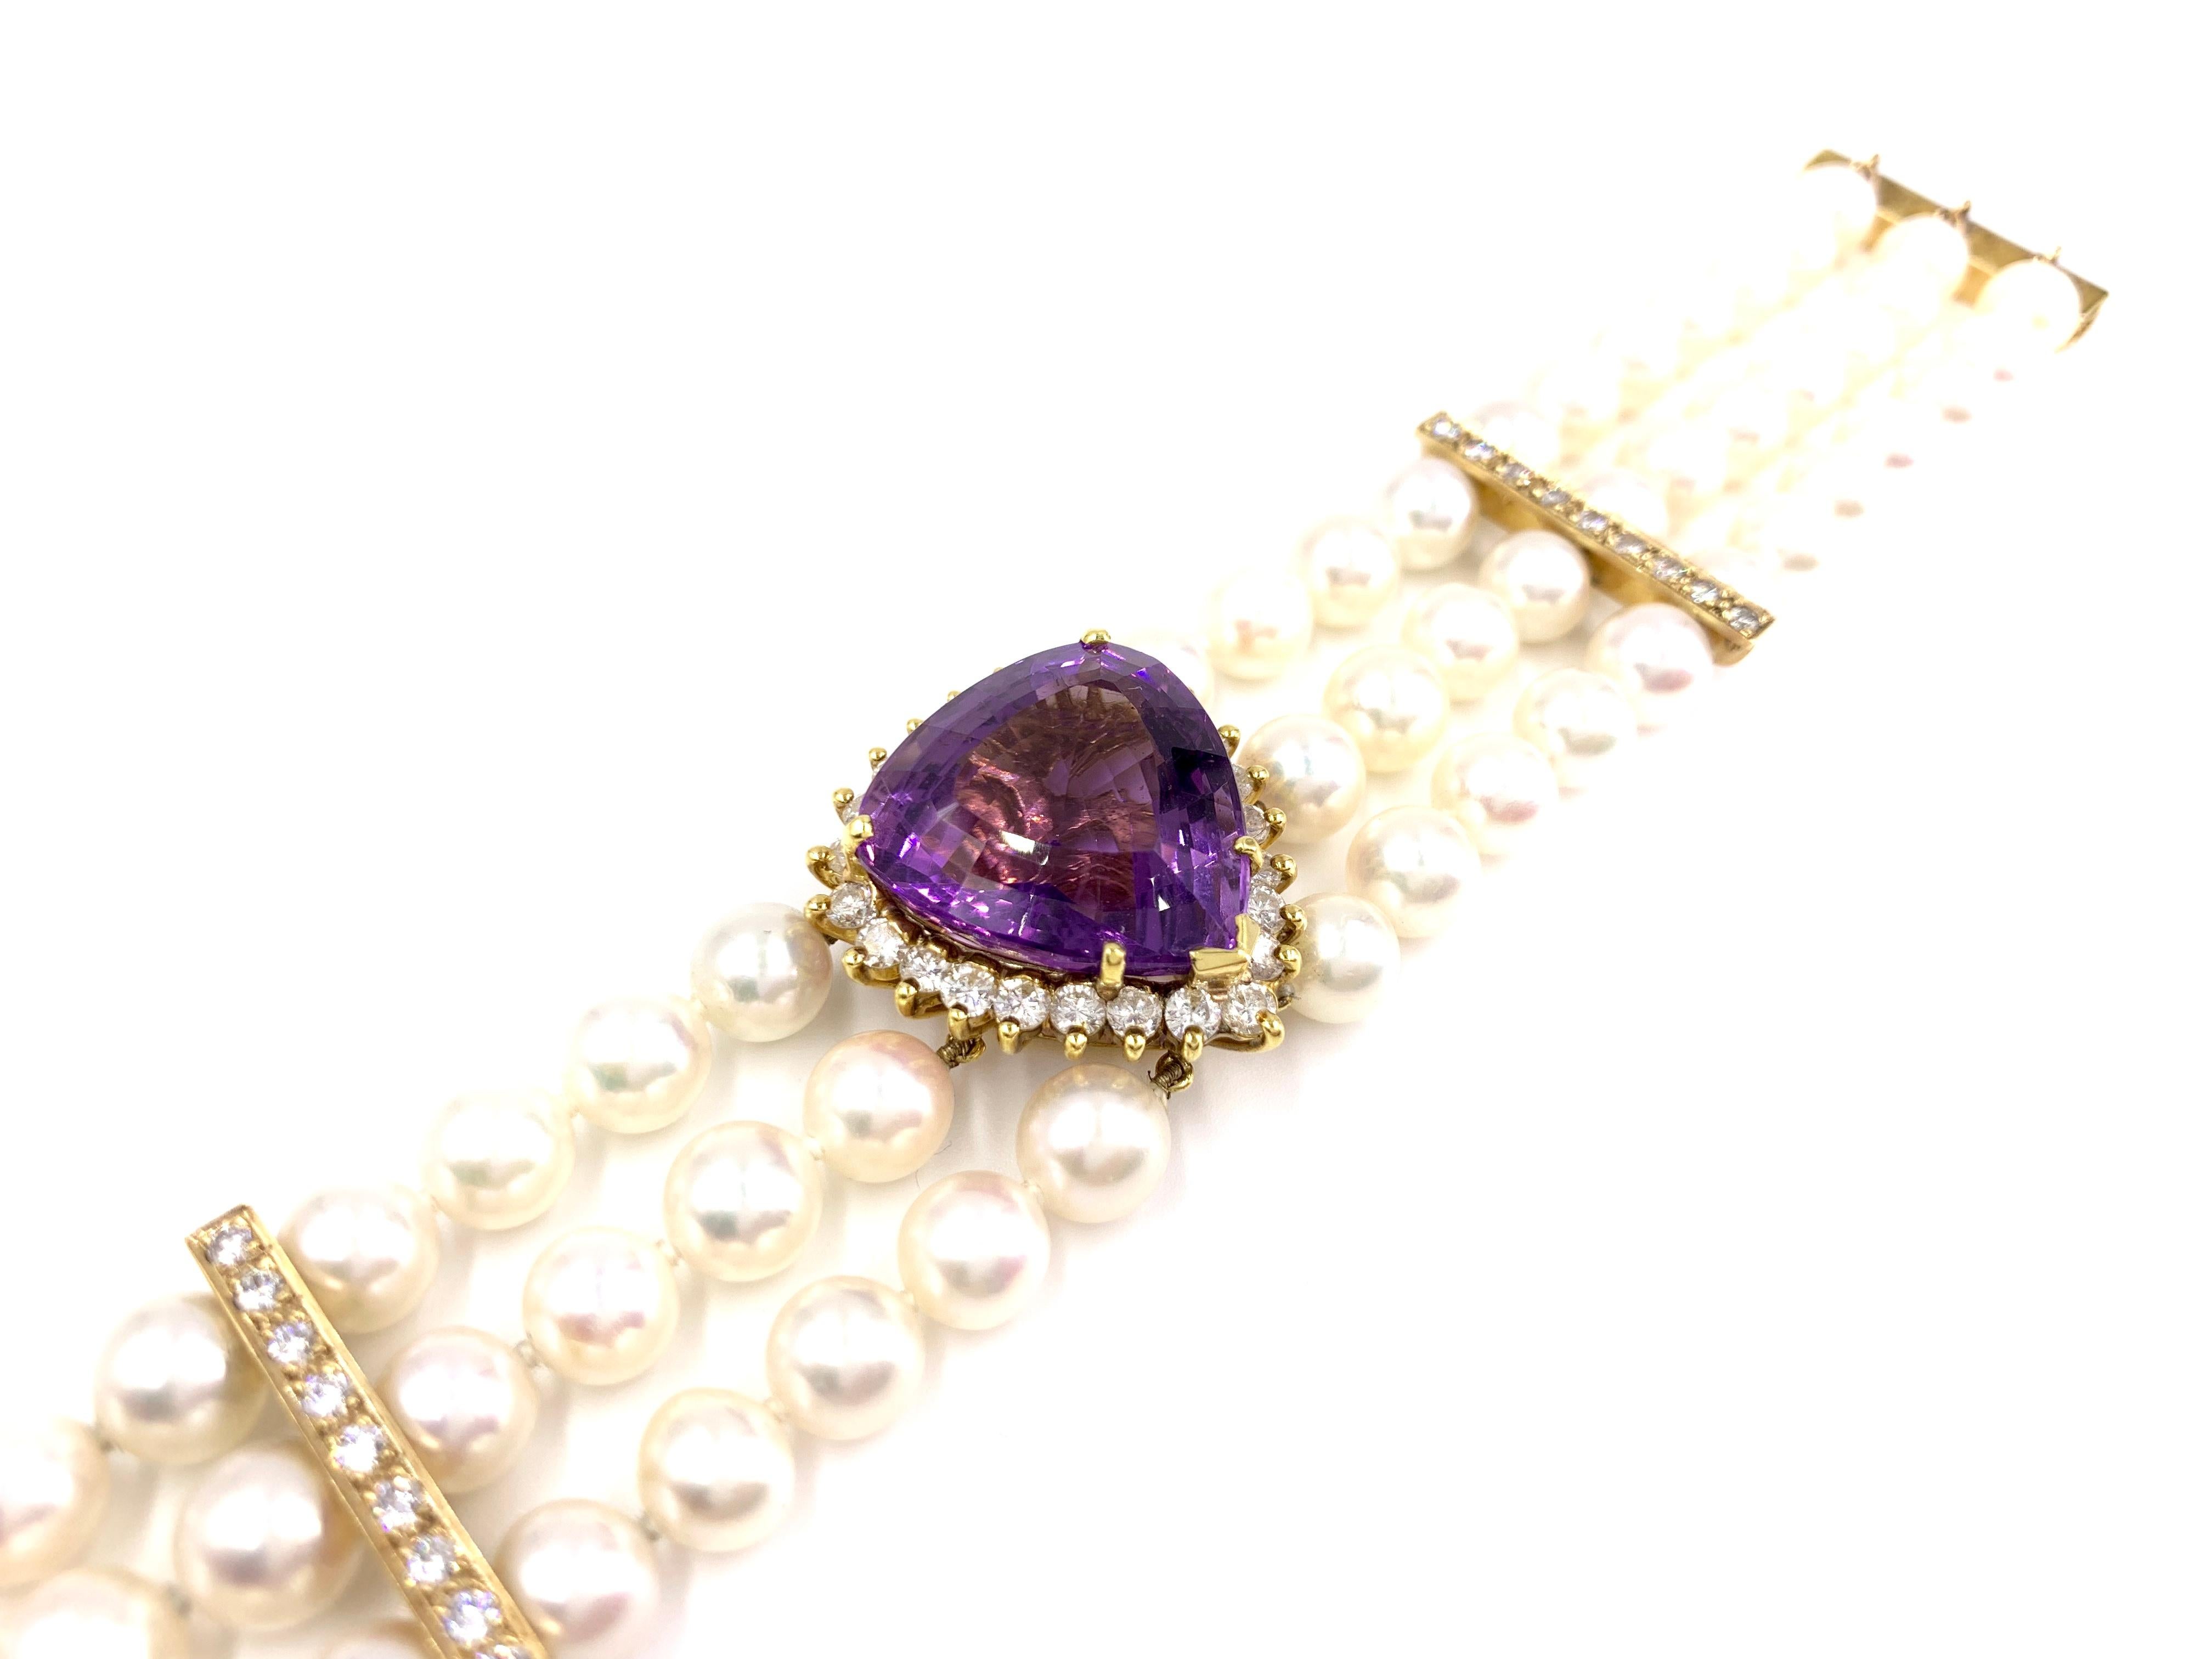 18 Karat Three-Strand Pearl Bracelet with Amethyst and Diamond Center In Good Condition For Sale In Pikesville, MD